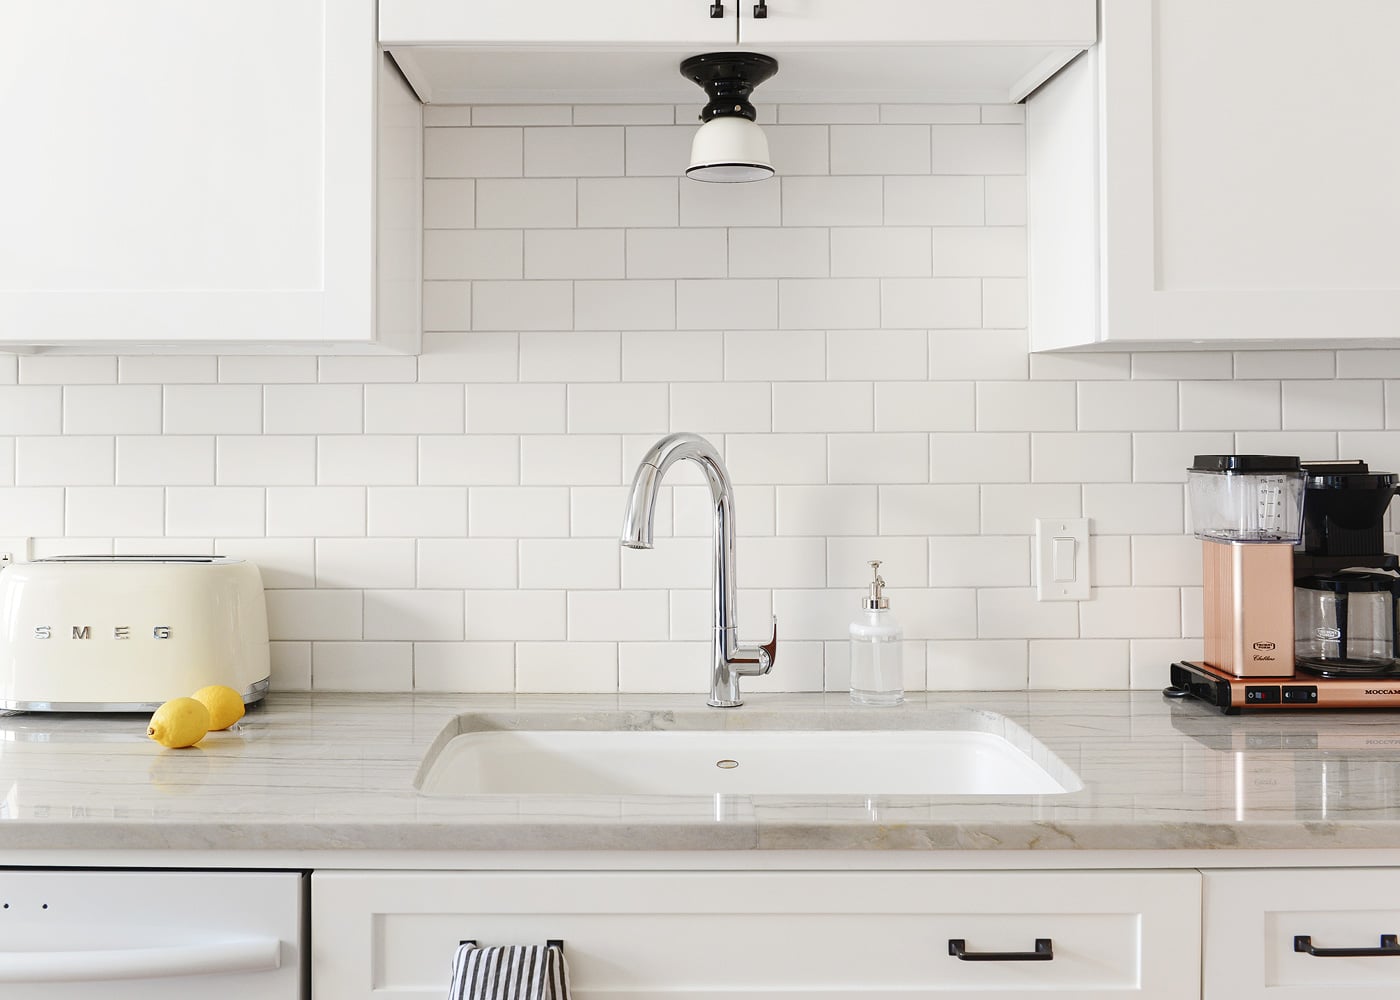 How To Clean A White Enamel Sink